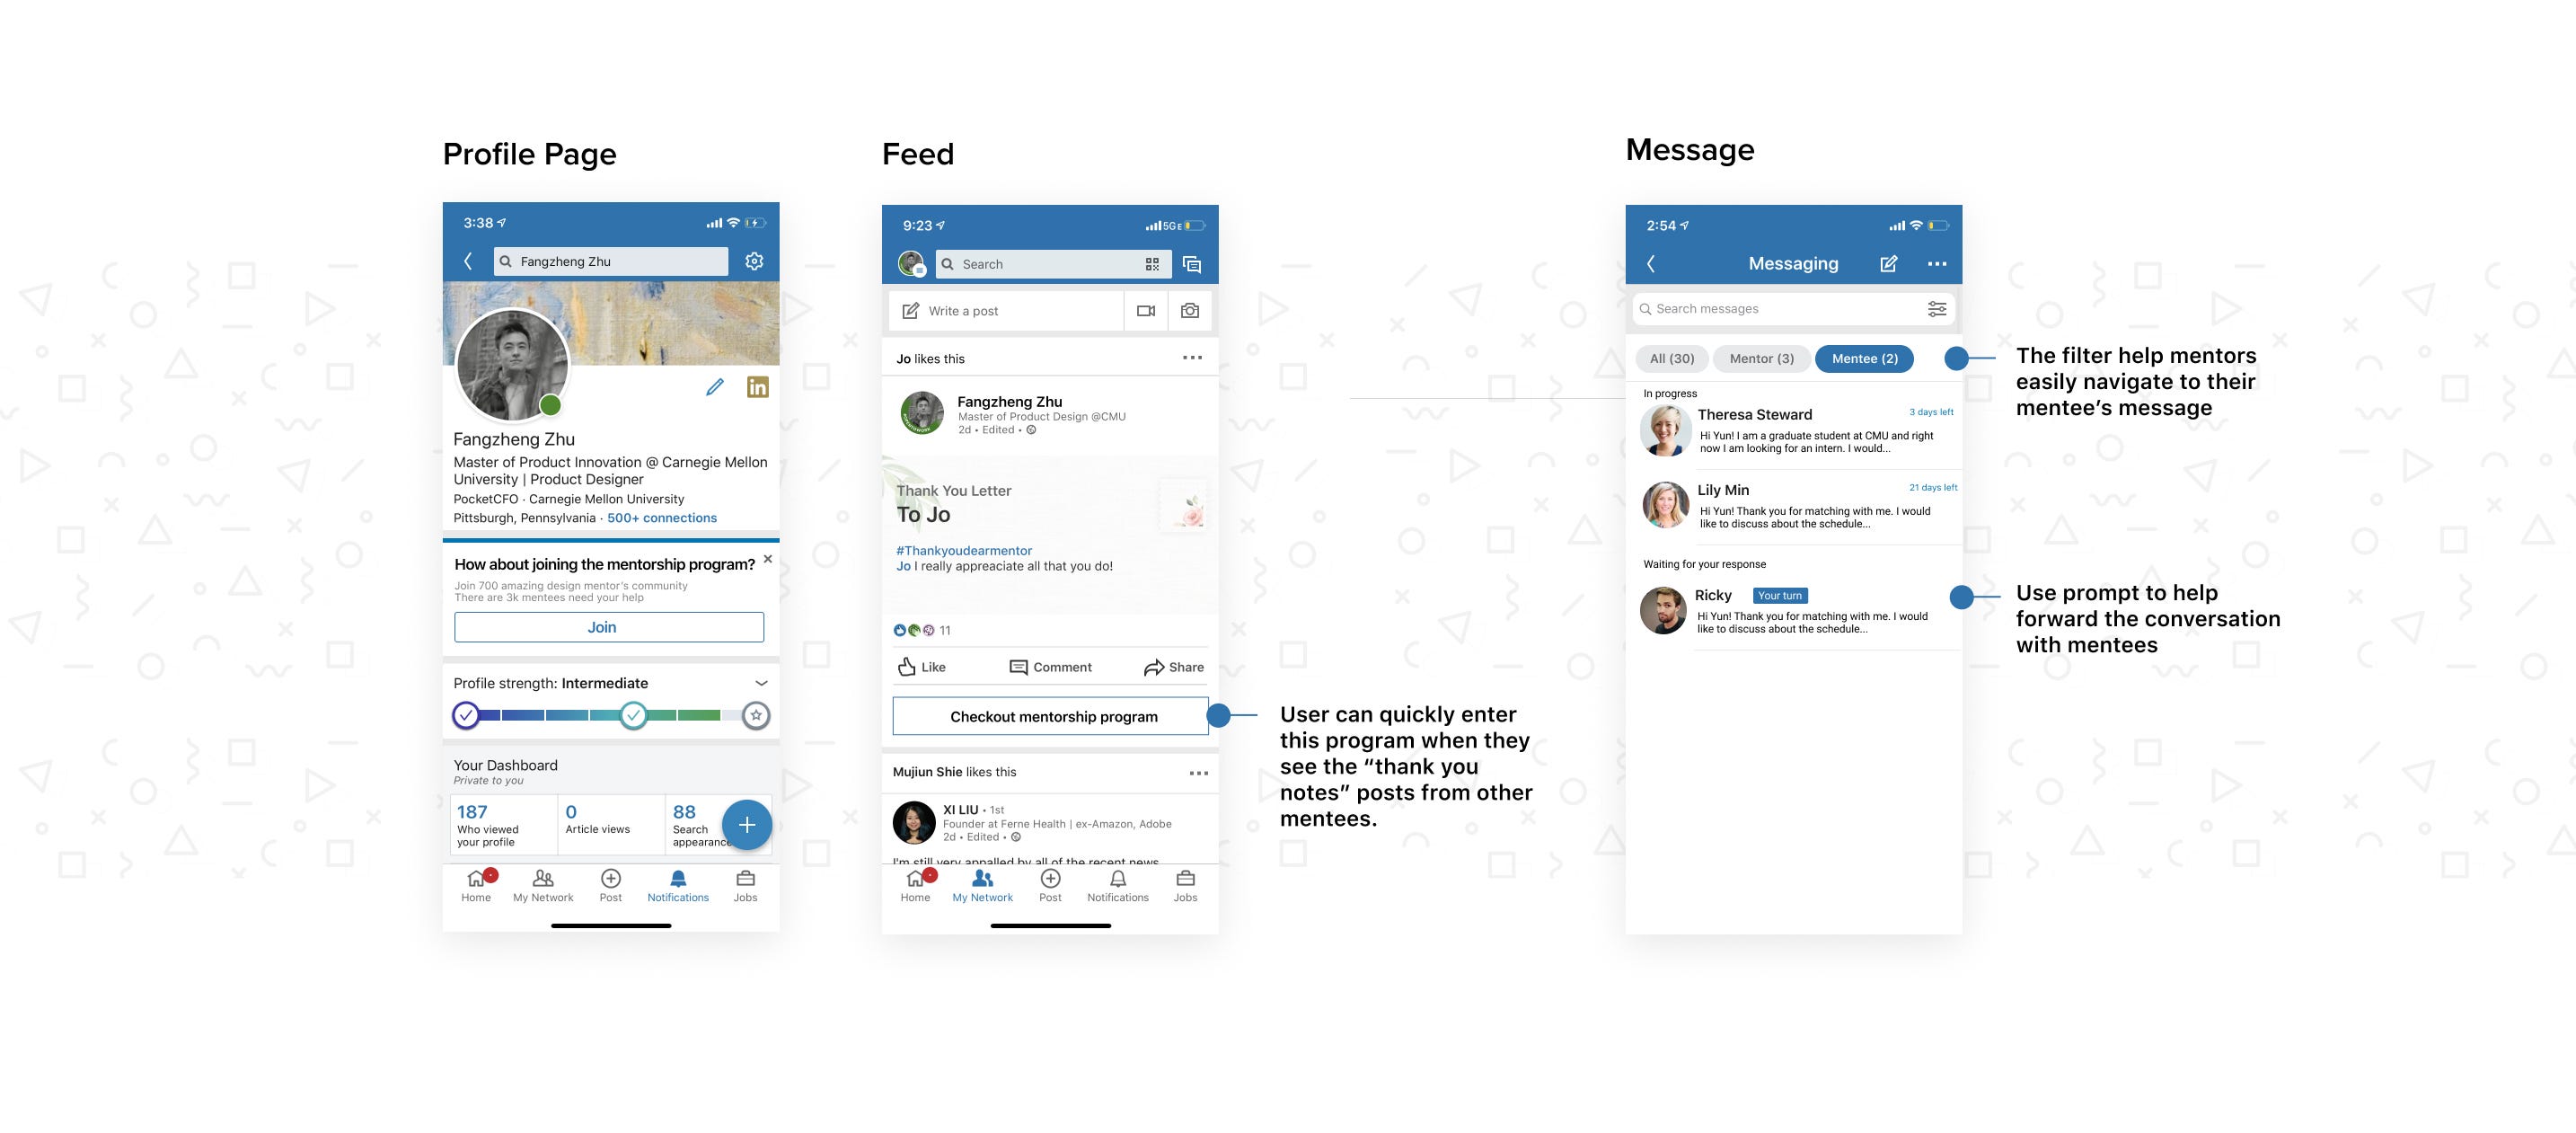 Redesigning Linkedin's mentorship feature — UX case study by Yun Yang | UX Collective